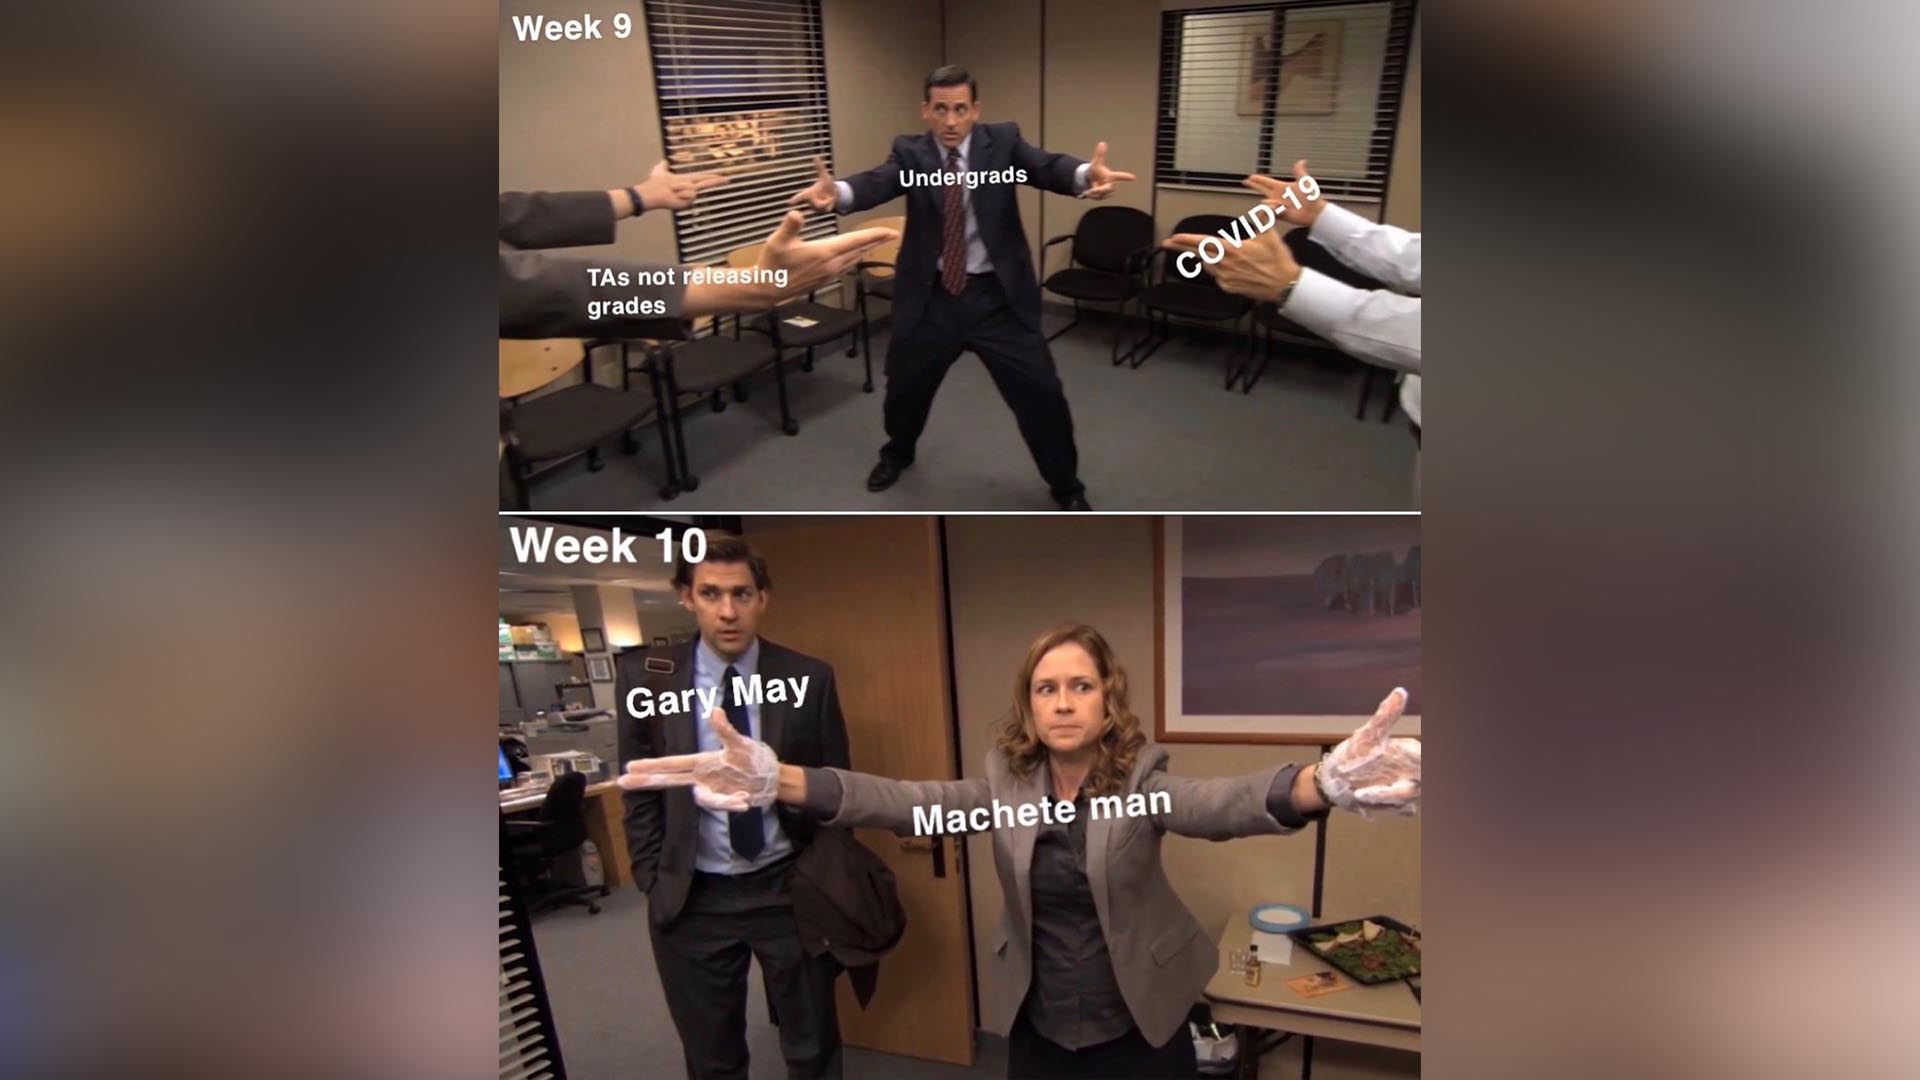 Best Meme: “The Office: Only Gary May can Save us now” - The Aggie